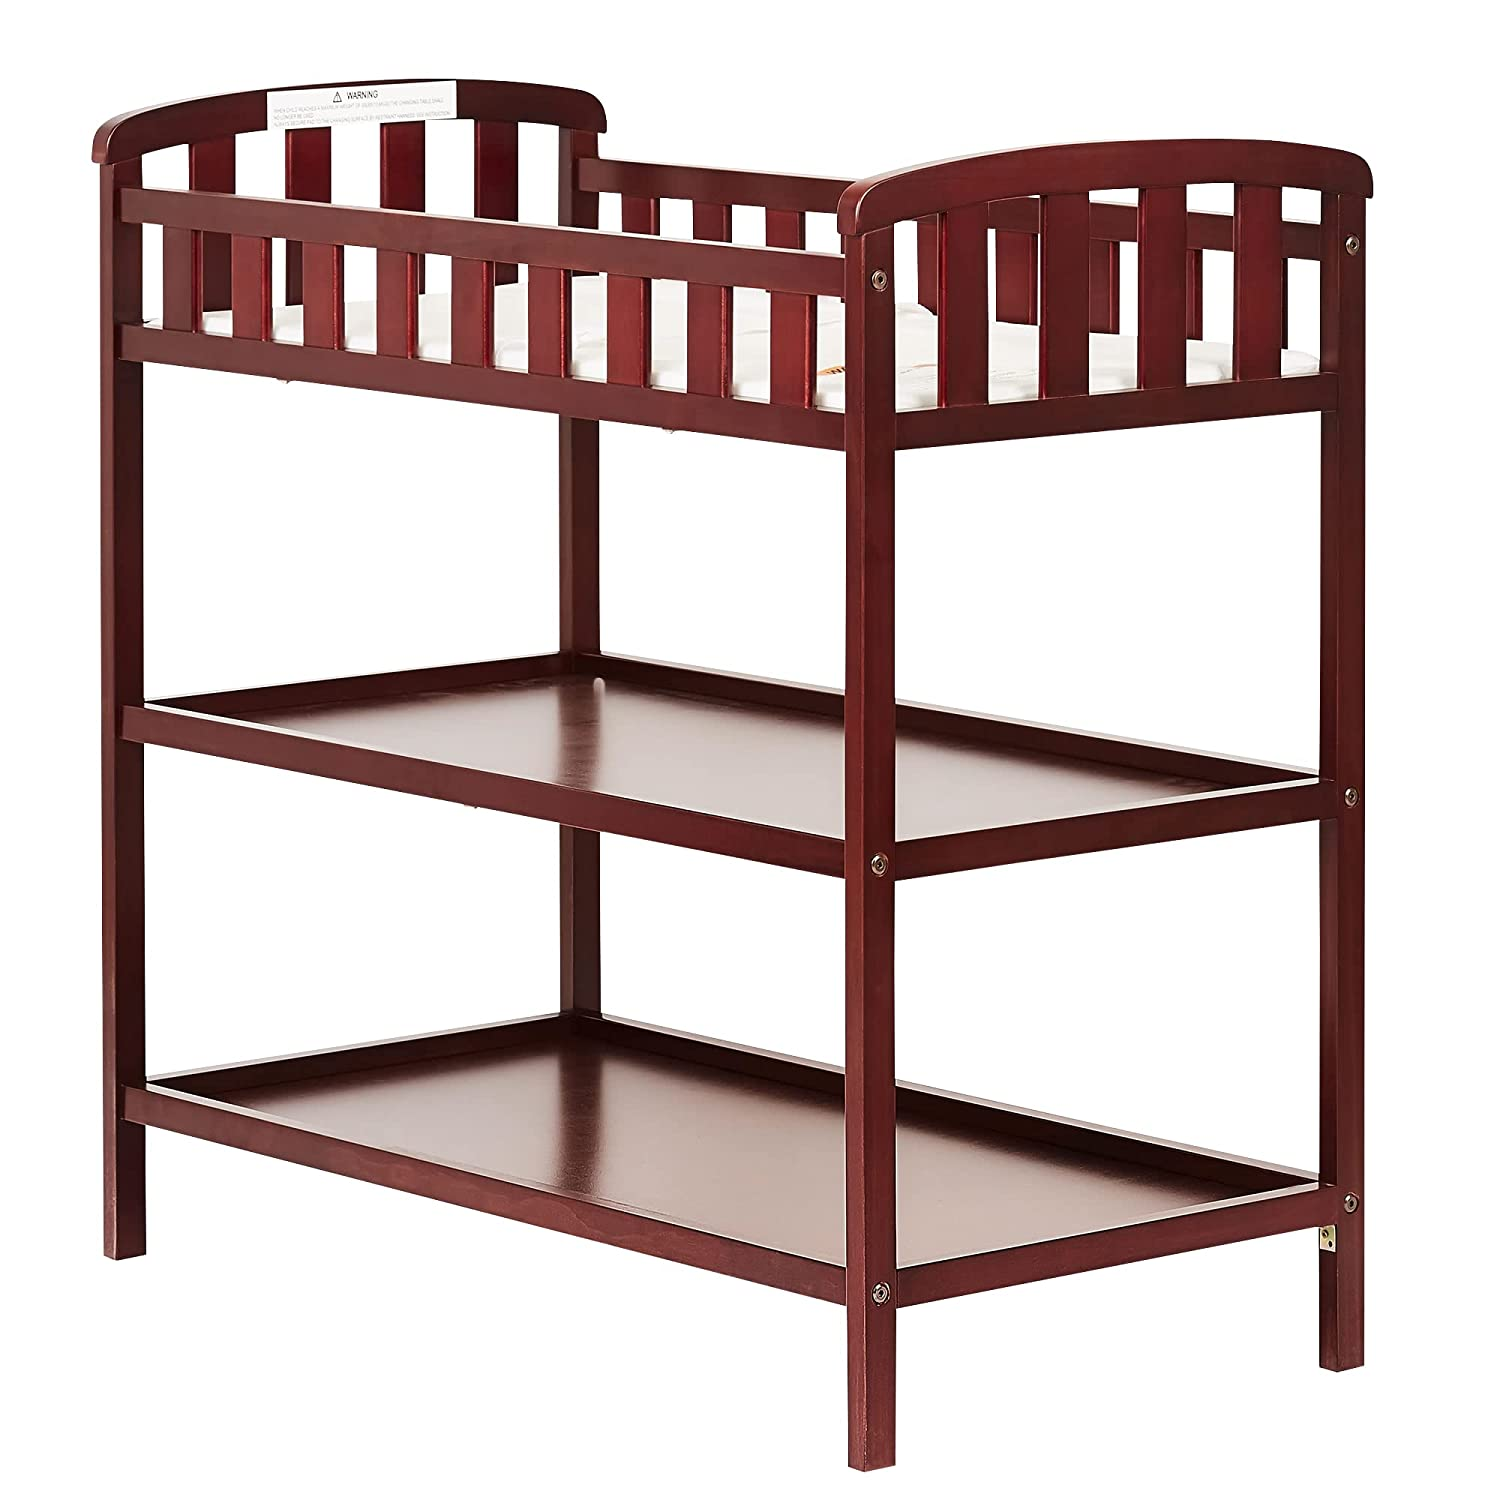 Dream On Me Emily Changing Table - Cherry (Comes With 1" Changing Pad) $73.10